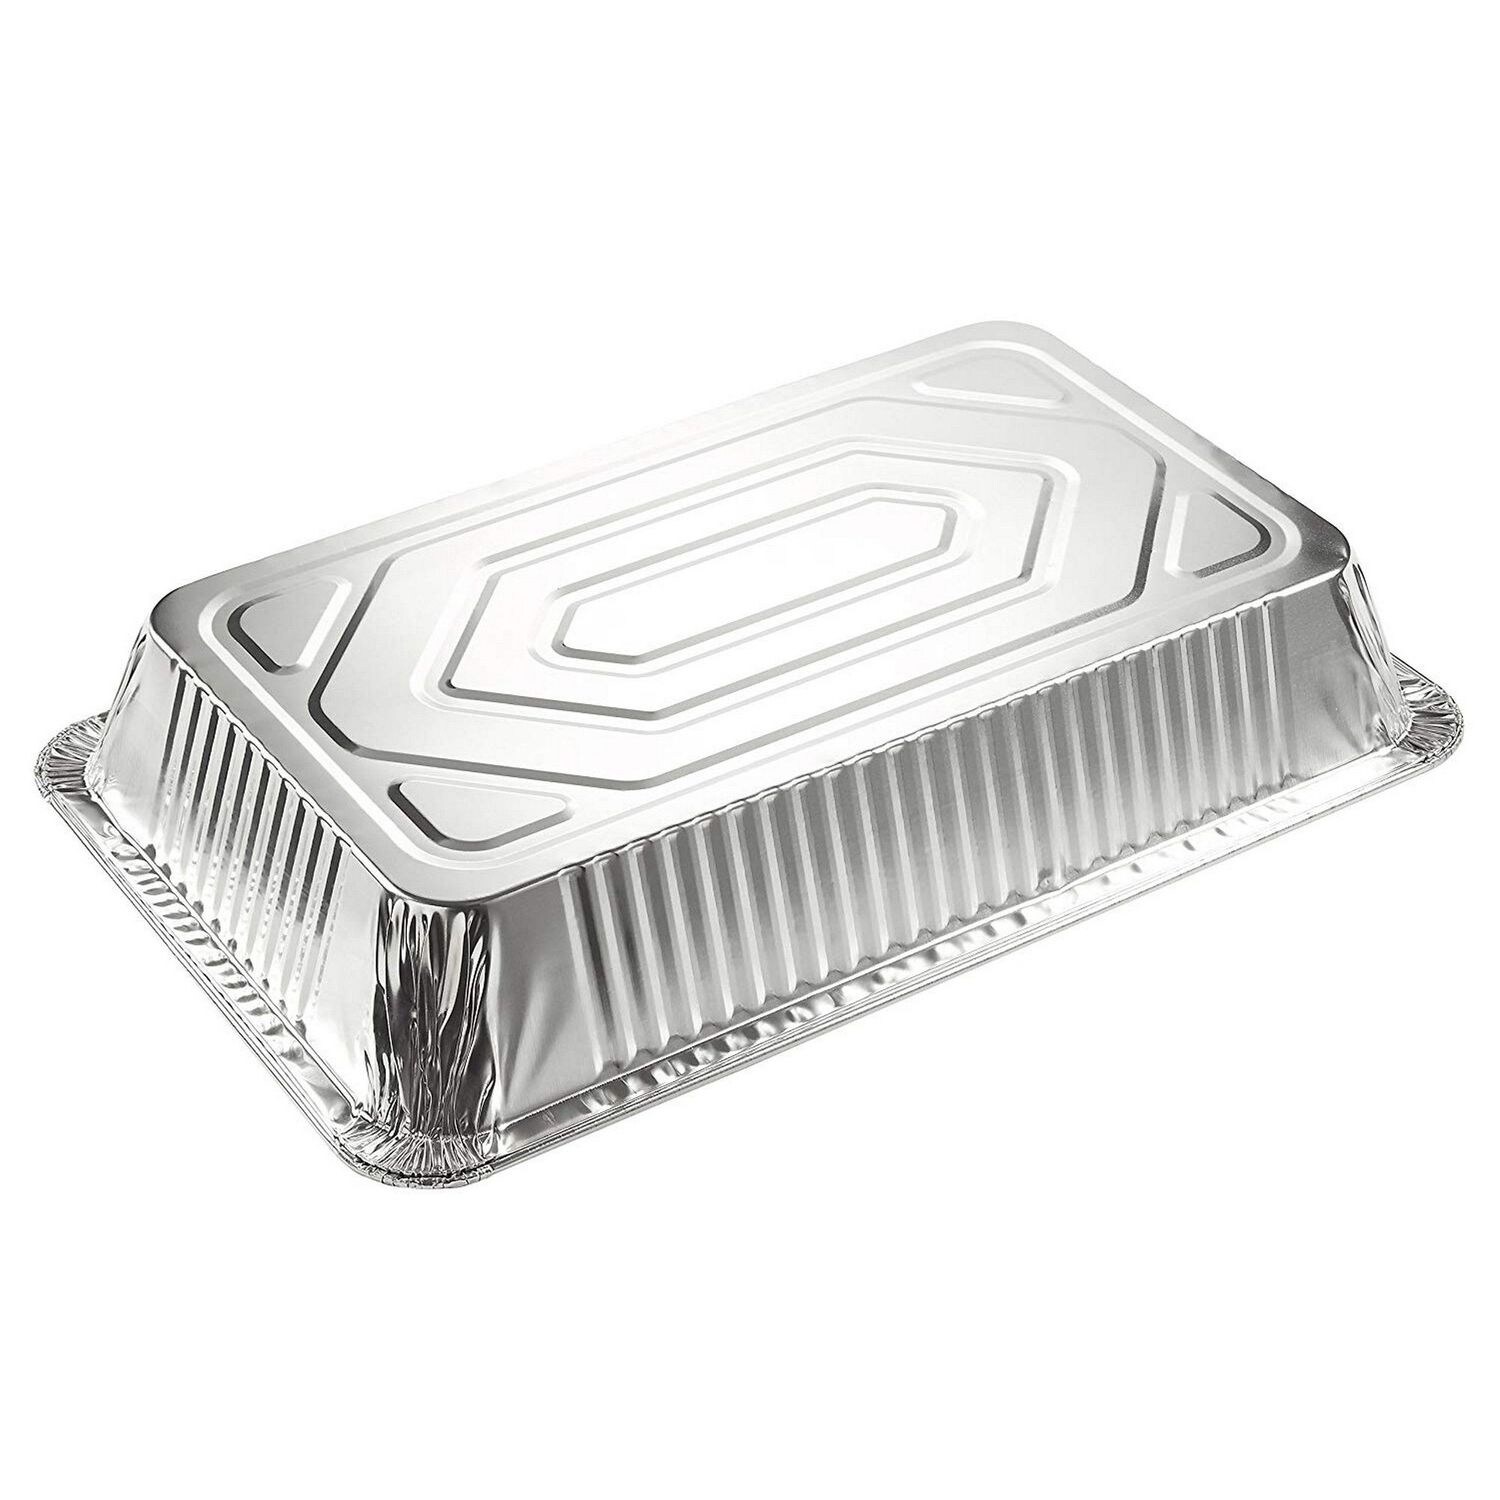 Funstitution Aluminum Foil Pans 8x8 Inches (30 Pack) - Tin Foil Pans with High Heat Conductivity - Disposable Aluminum Tray Cookware for Baking